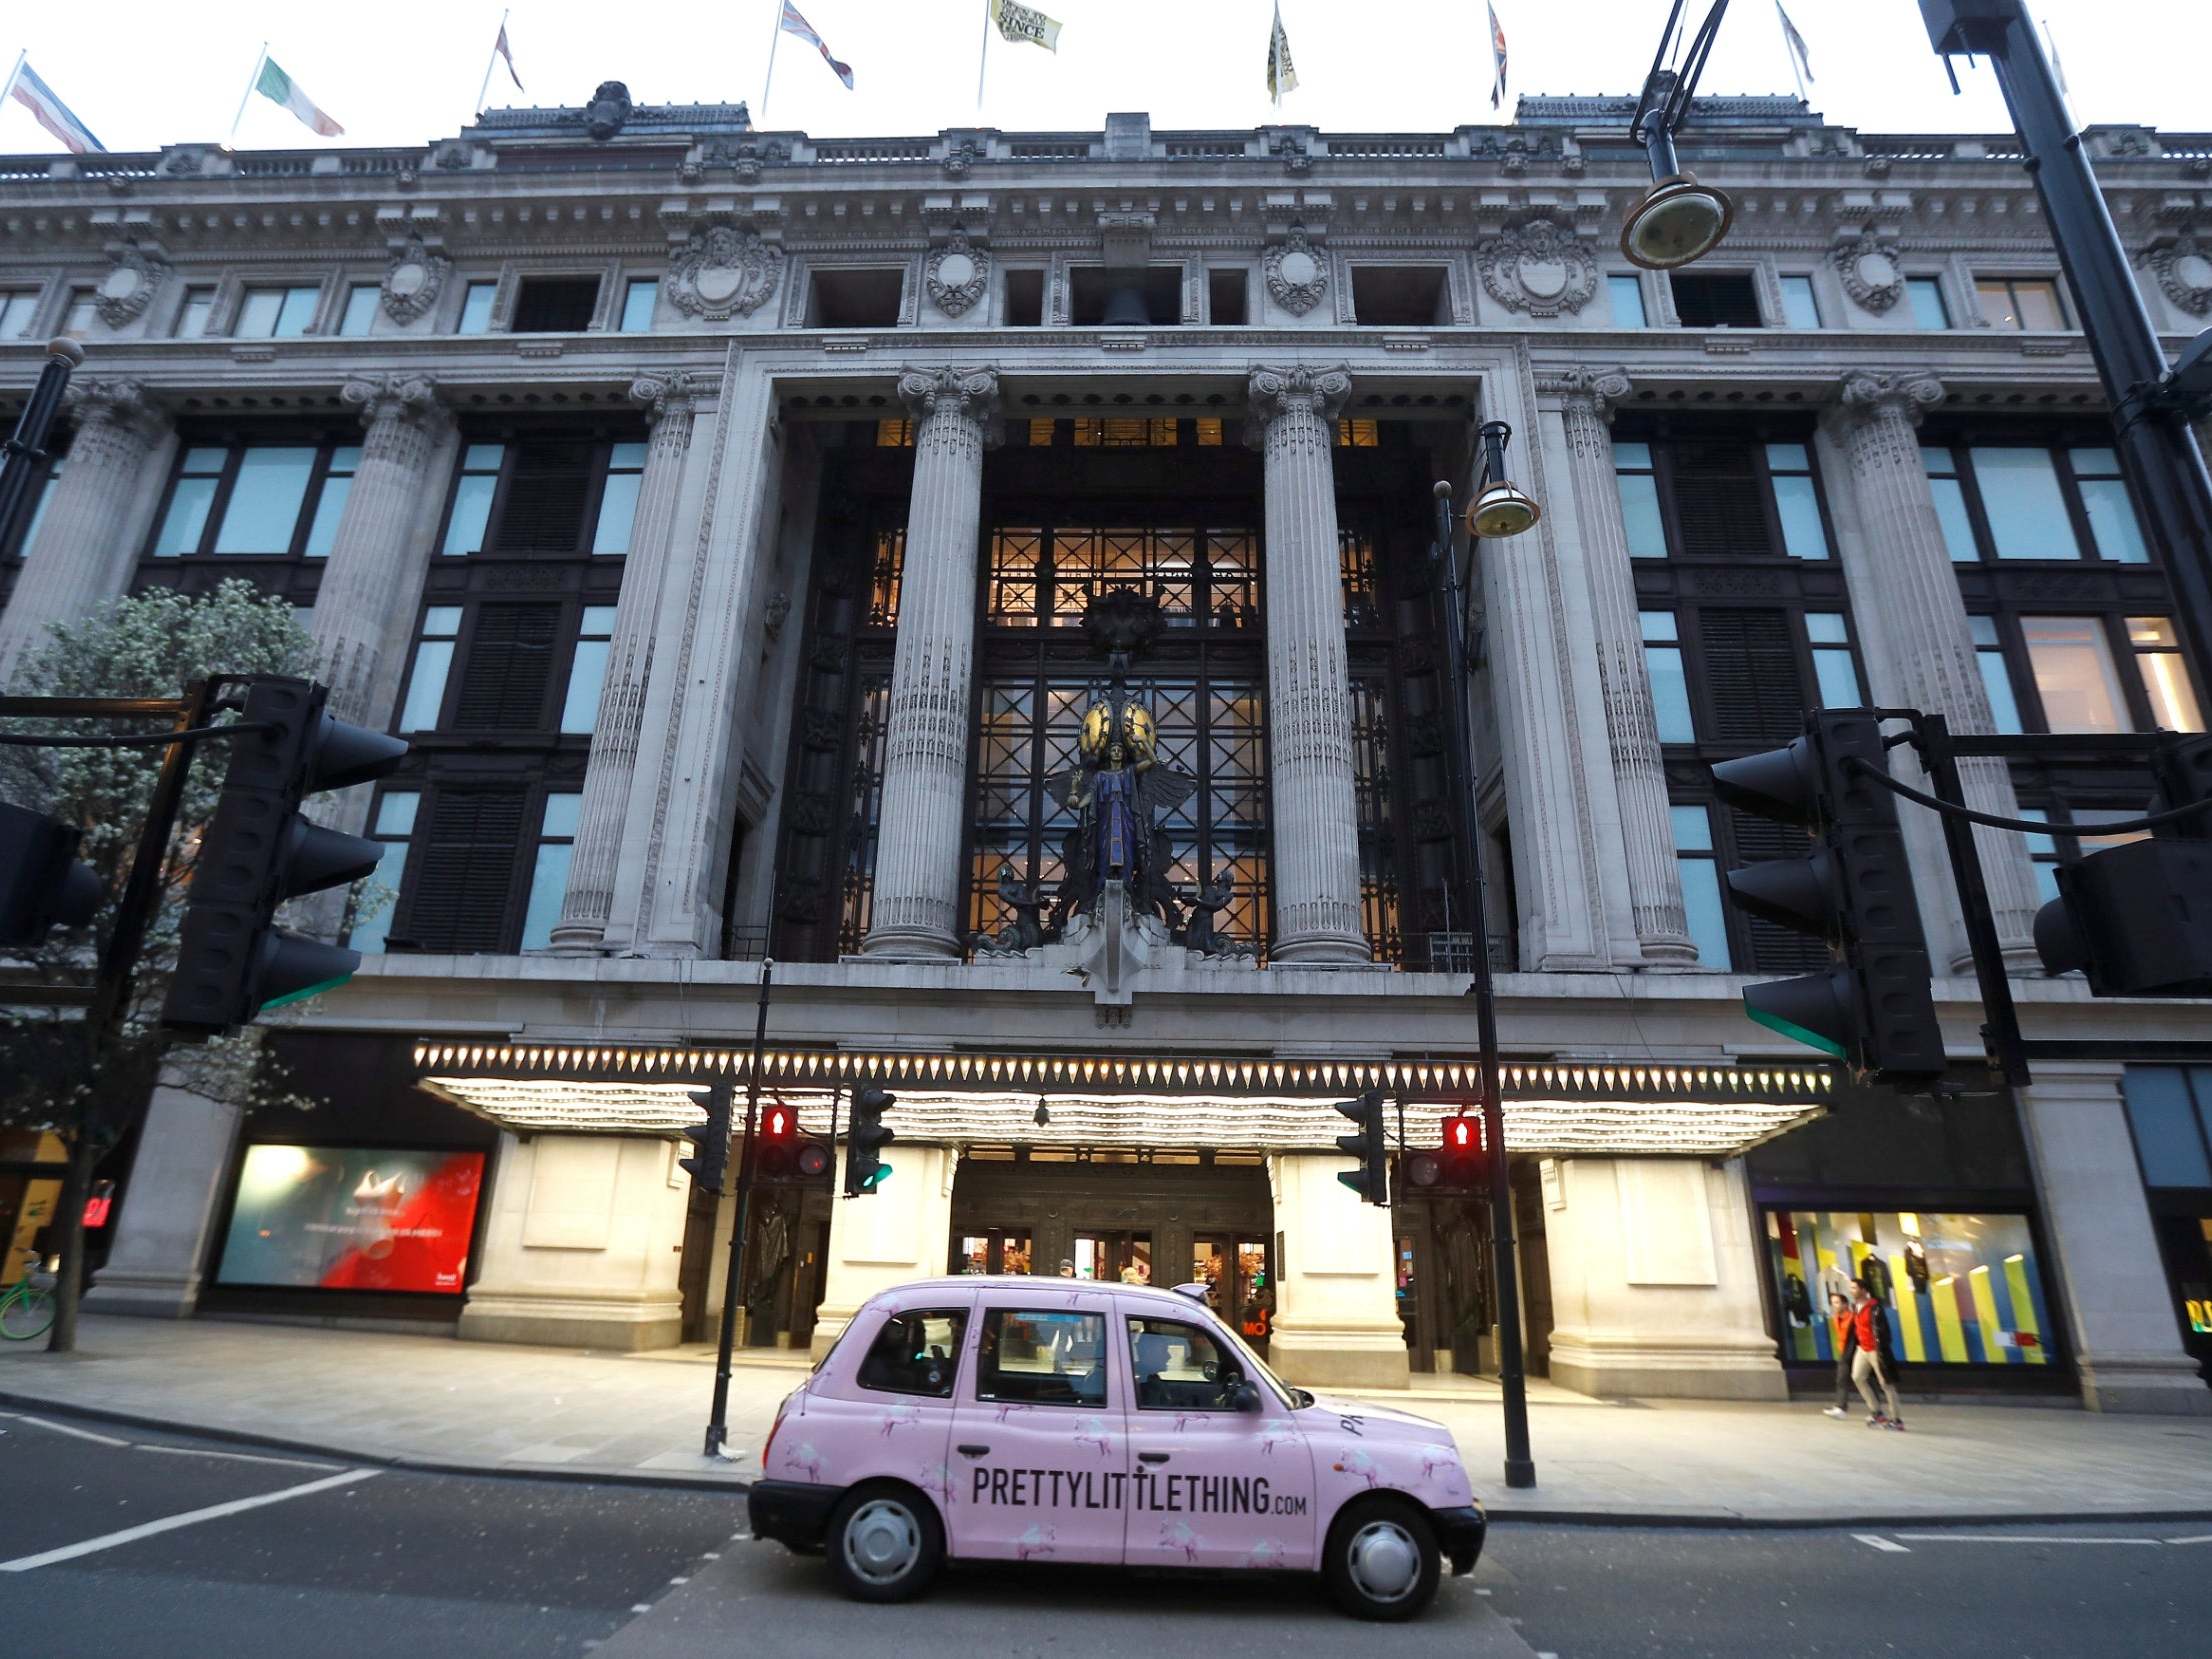 The company, particularly its flagship London store on Oxford street, relies on wealthy overseas visitors for much of its income